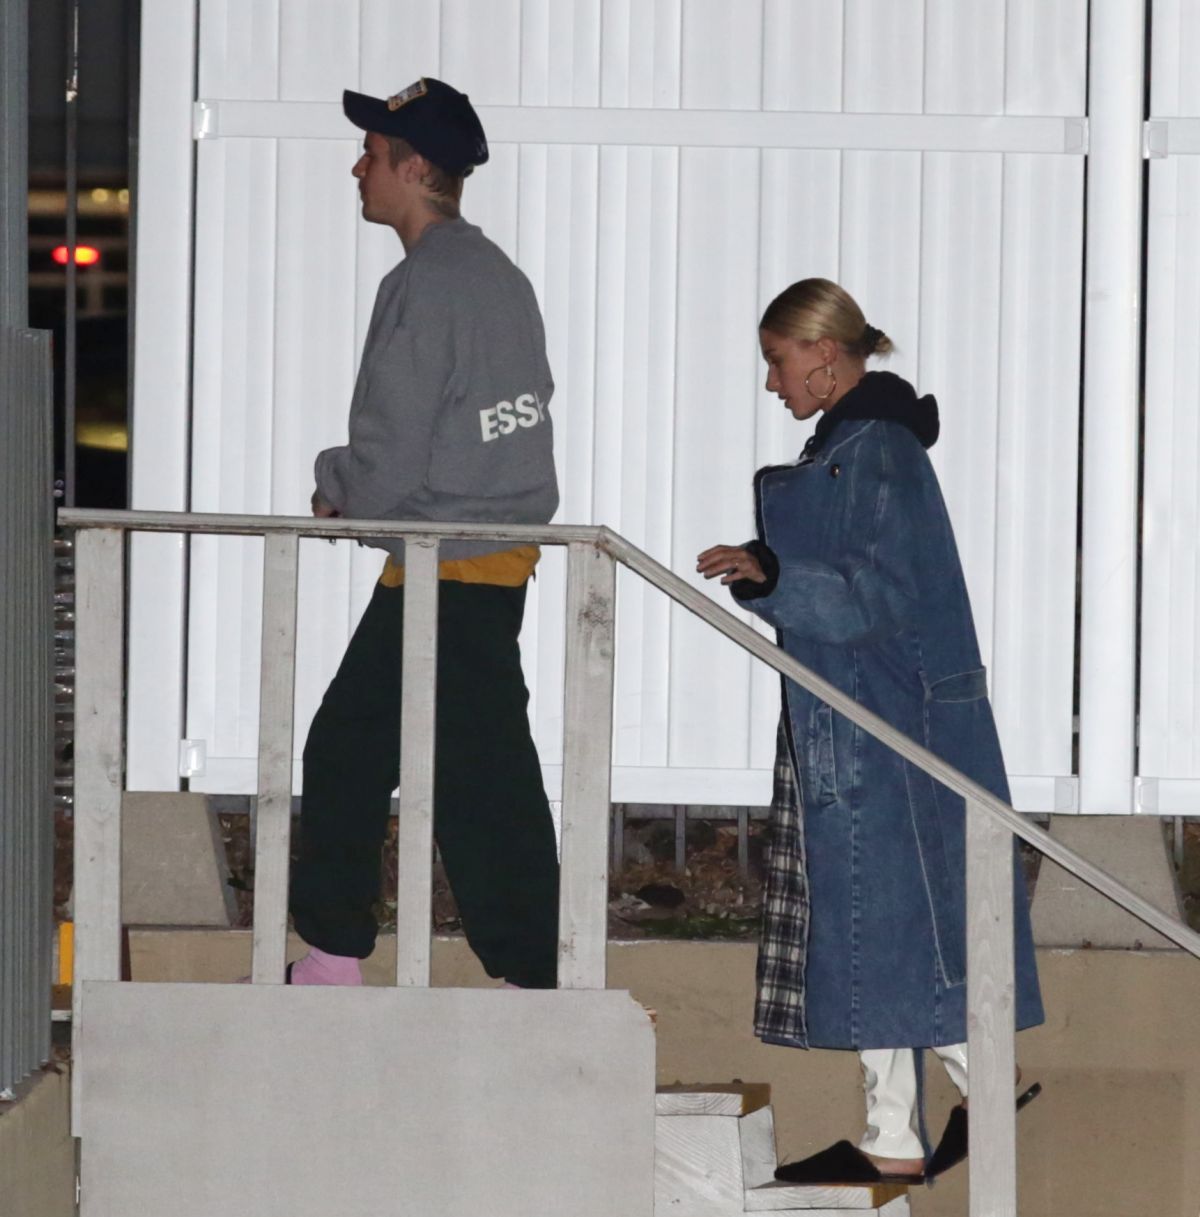 hailey-and-justin-bieber-night-out-in-los-angeles-03-20-2019-3.jpg